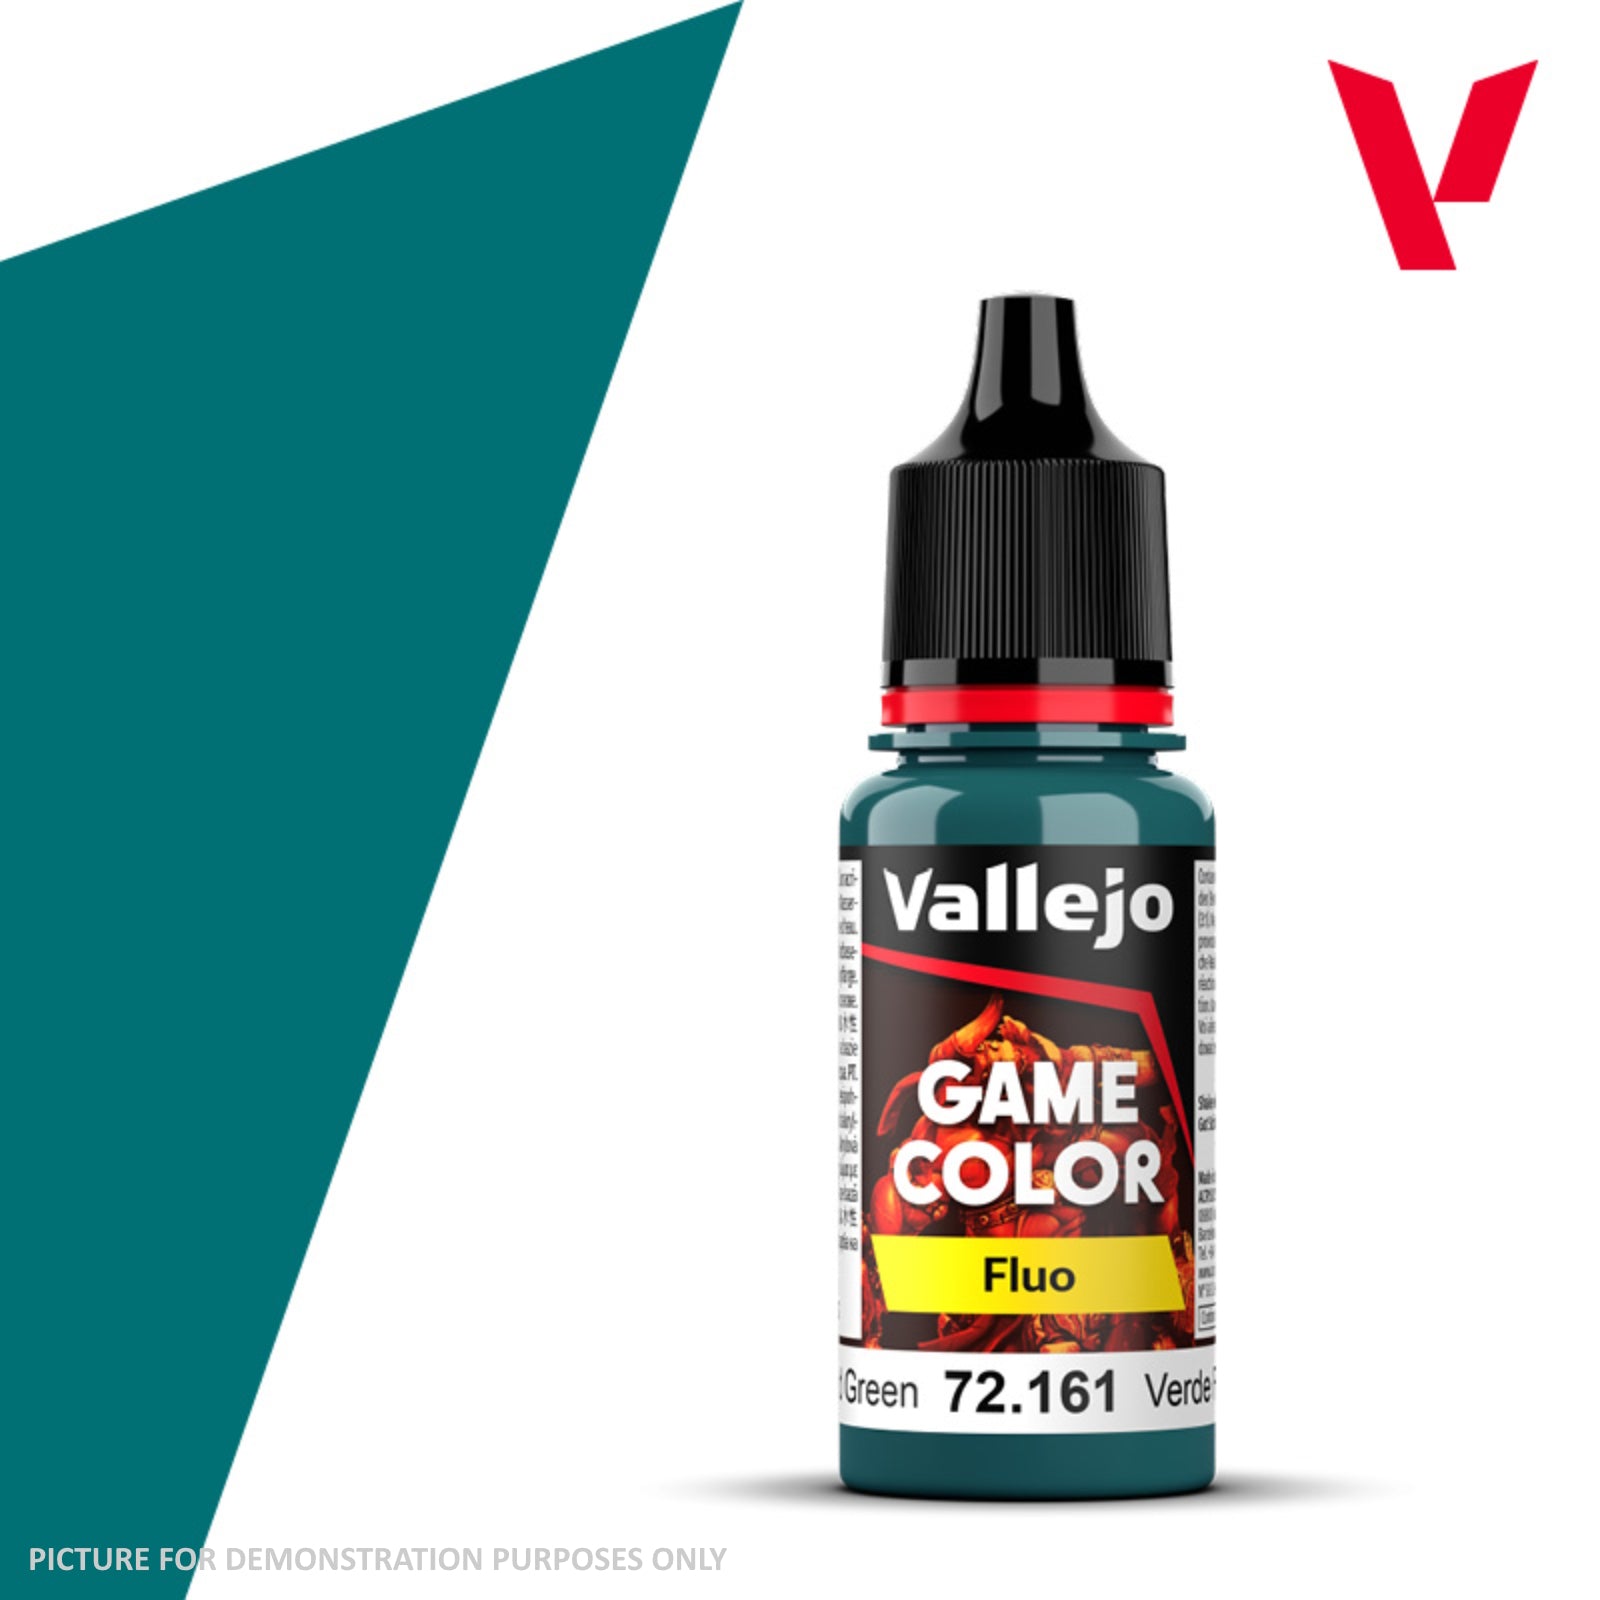 Vallejo Game Colour Fluo - 72.161 Cold Green 18ml